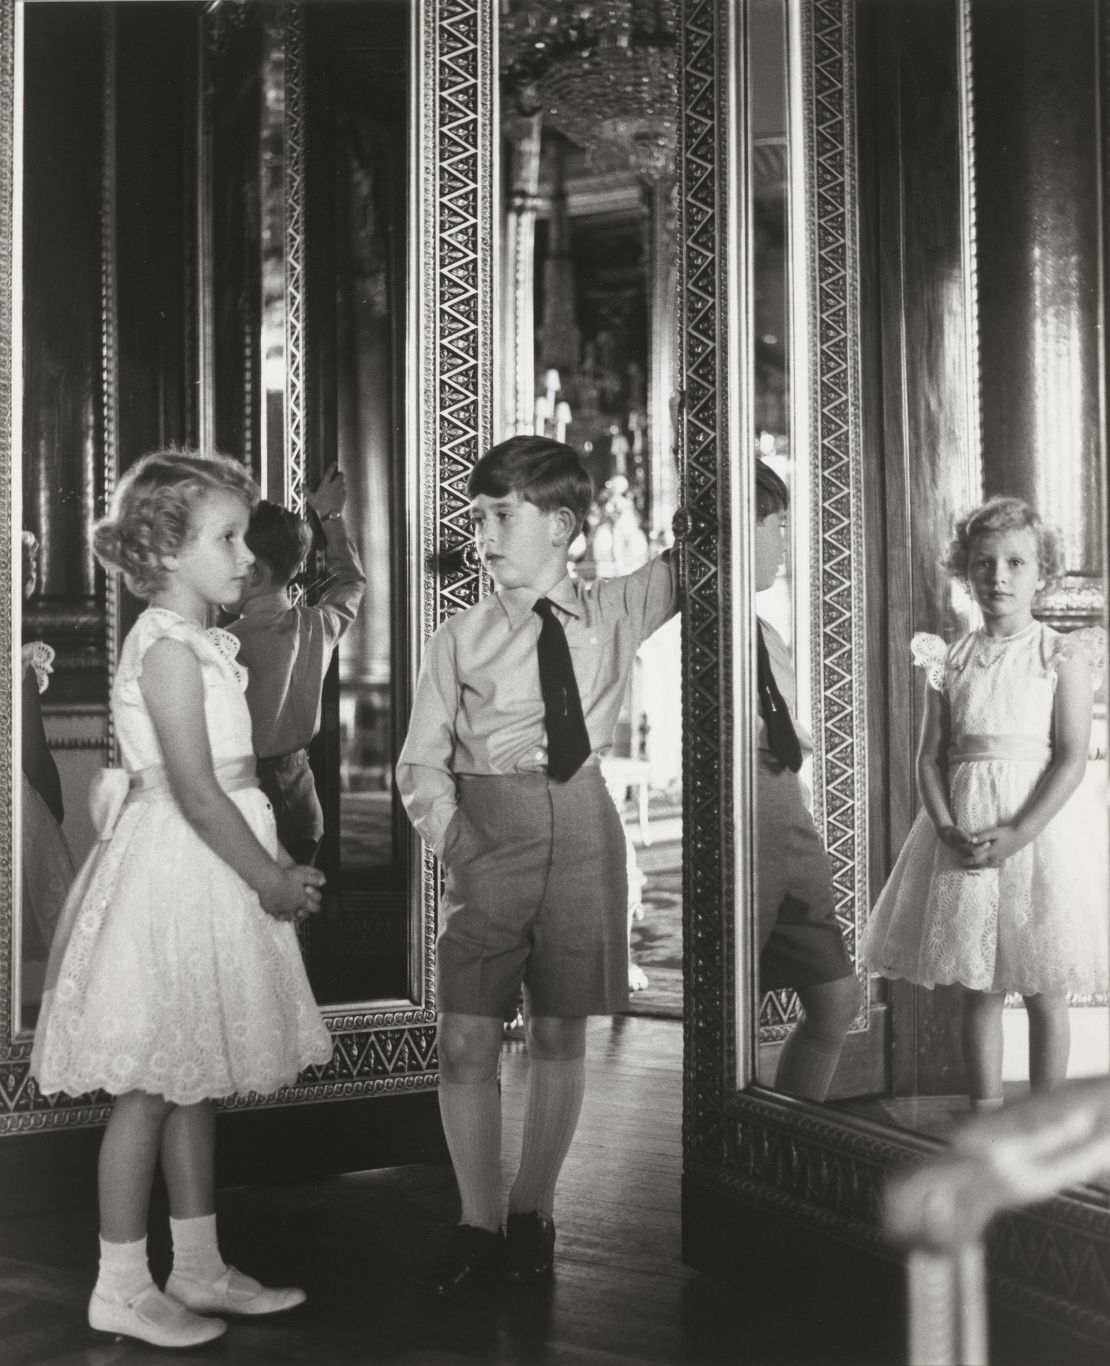 The current king as a child alongside his younger sister Princess Anne in 1956.